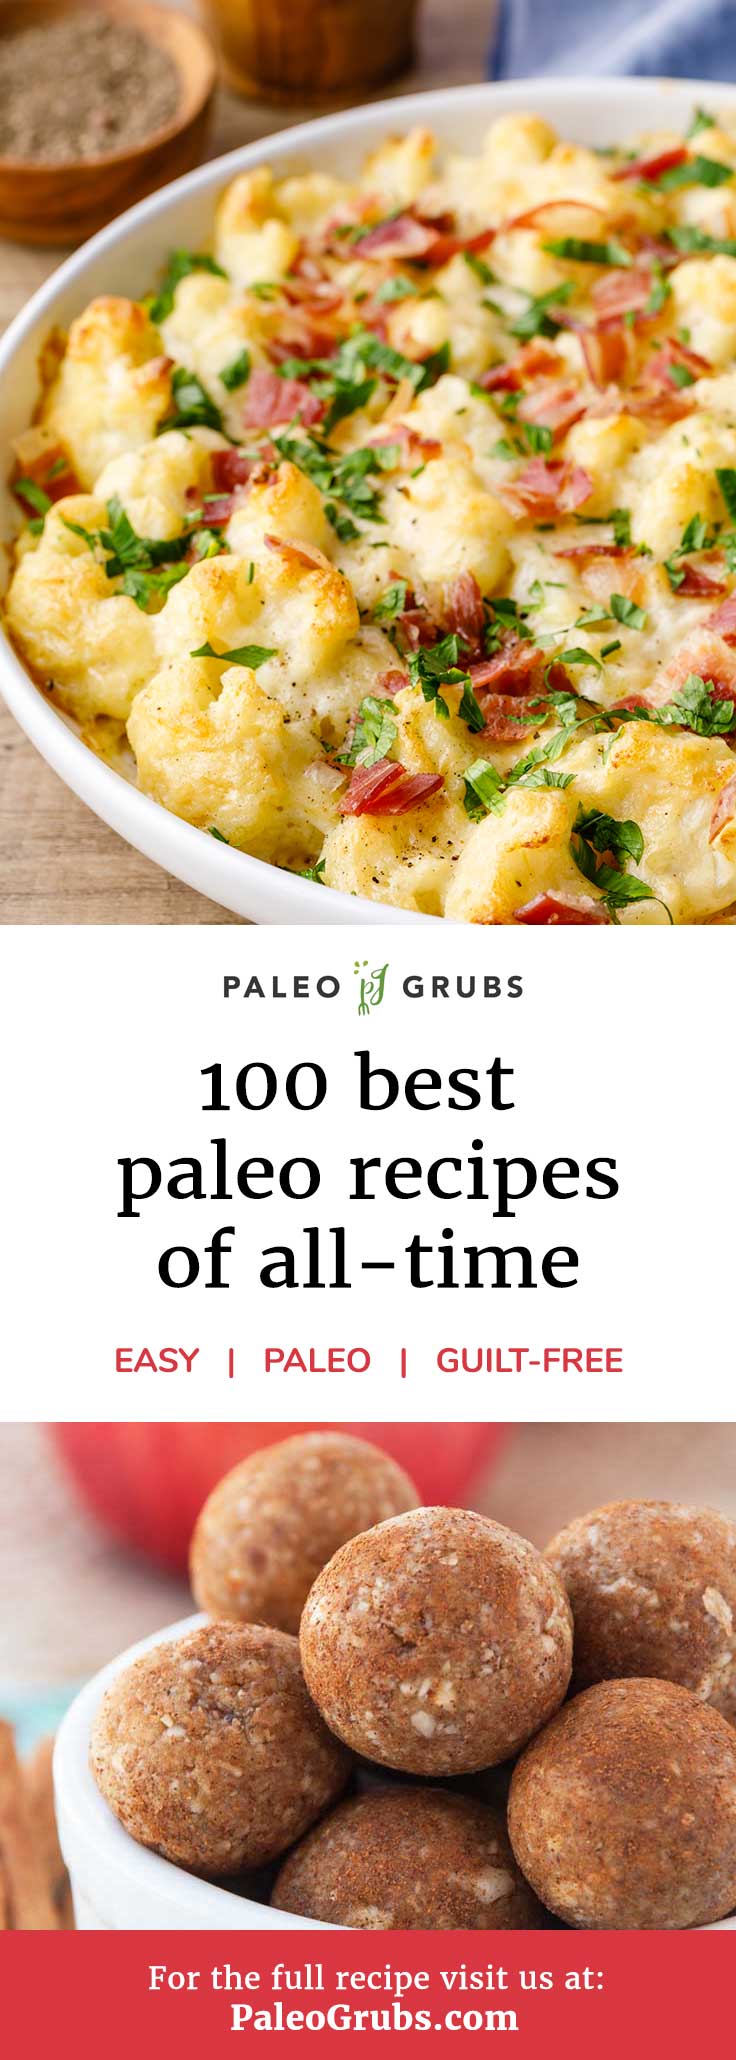 100 Best Paleo Diet Recipes- the best list of Paleo recipes out there. Organized by meal and category. Love it!